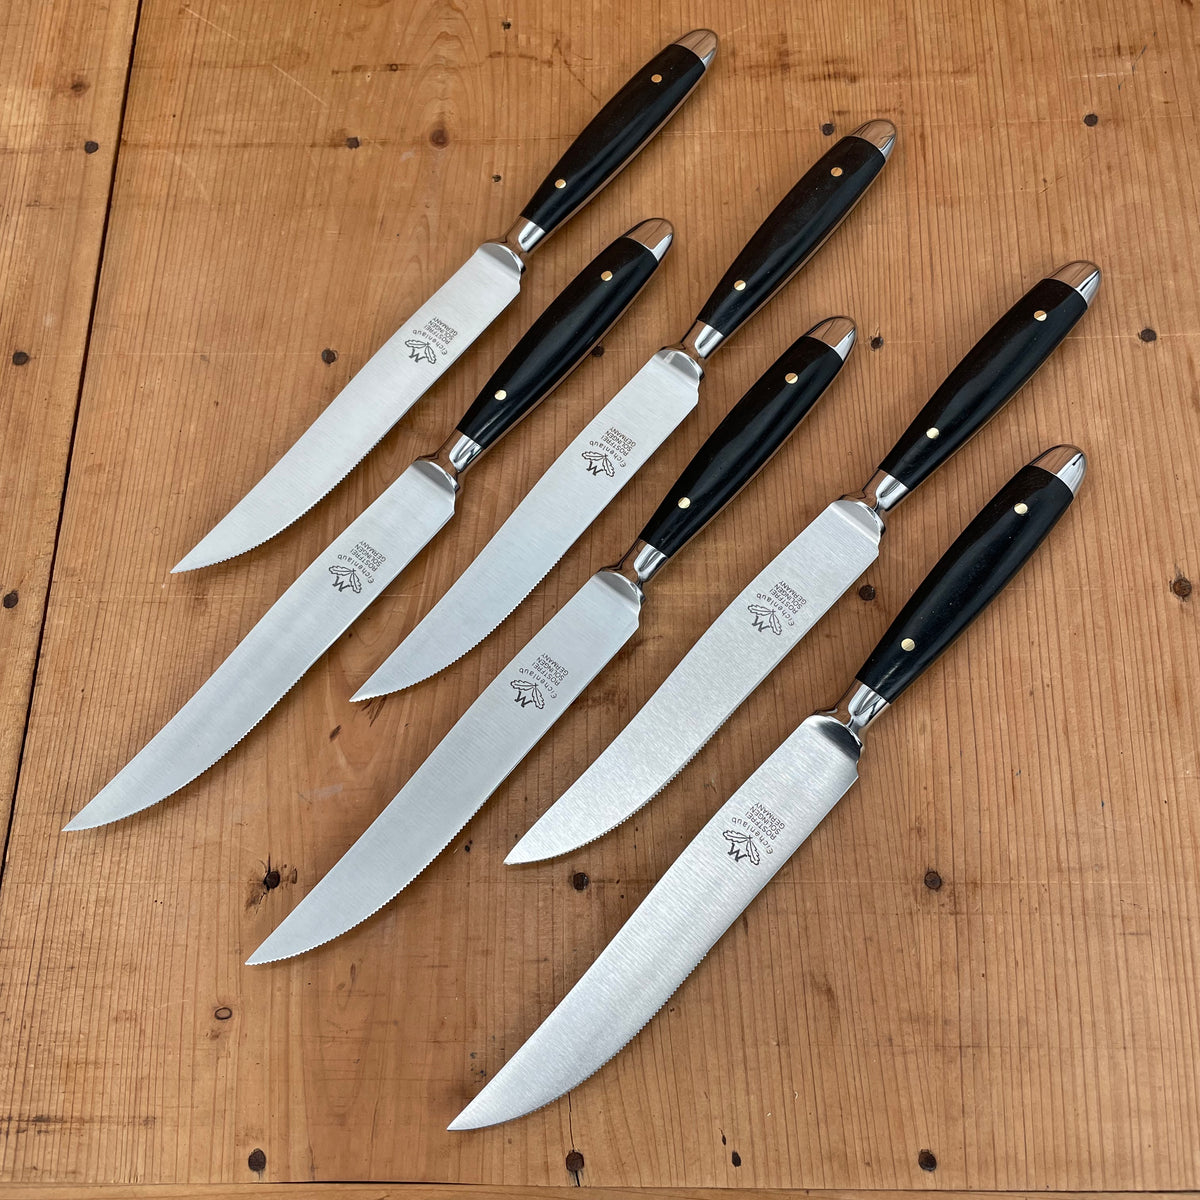 Eichenlaub Forged Tableware Steak Knife Set Stainless Paper Stone Polished Handles - 6 Pieces